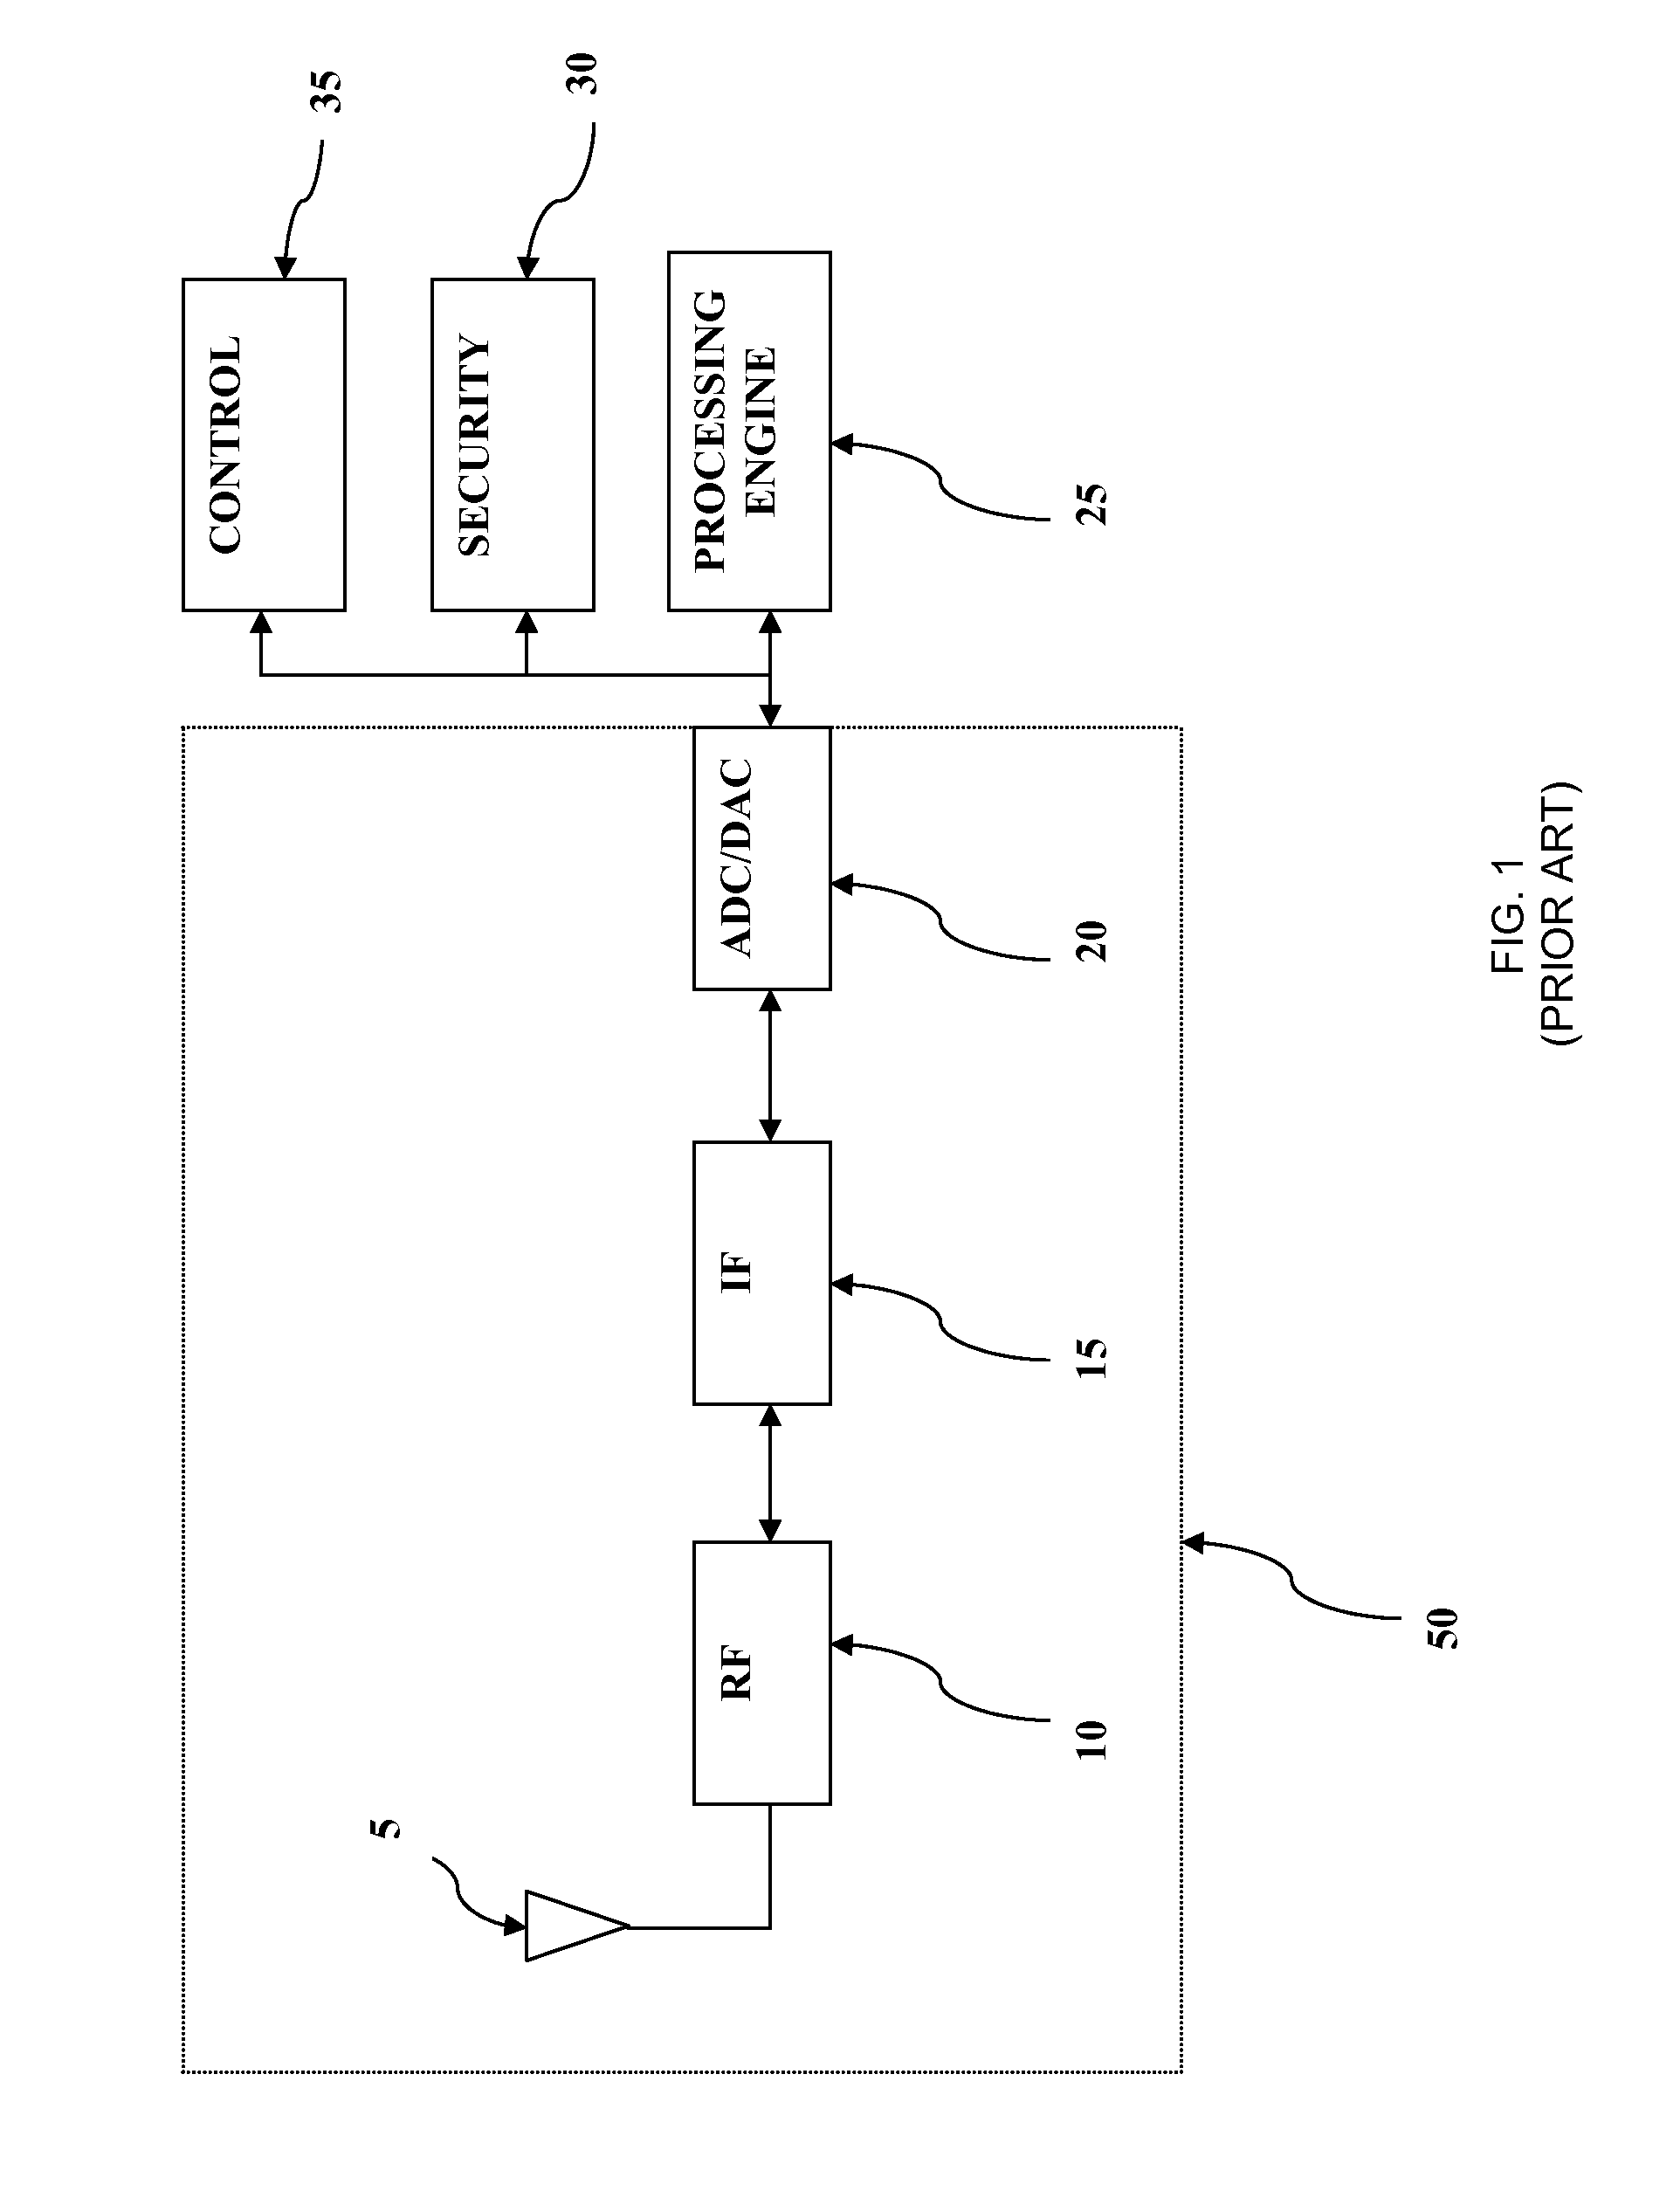 Programmable logic device with embedded switch fabric